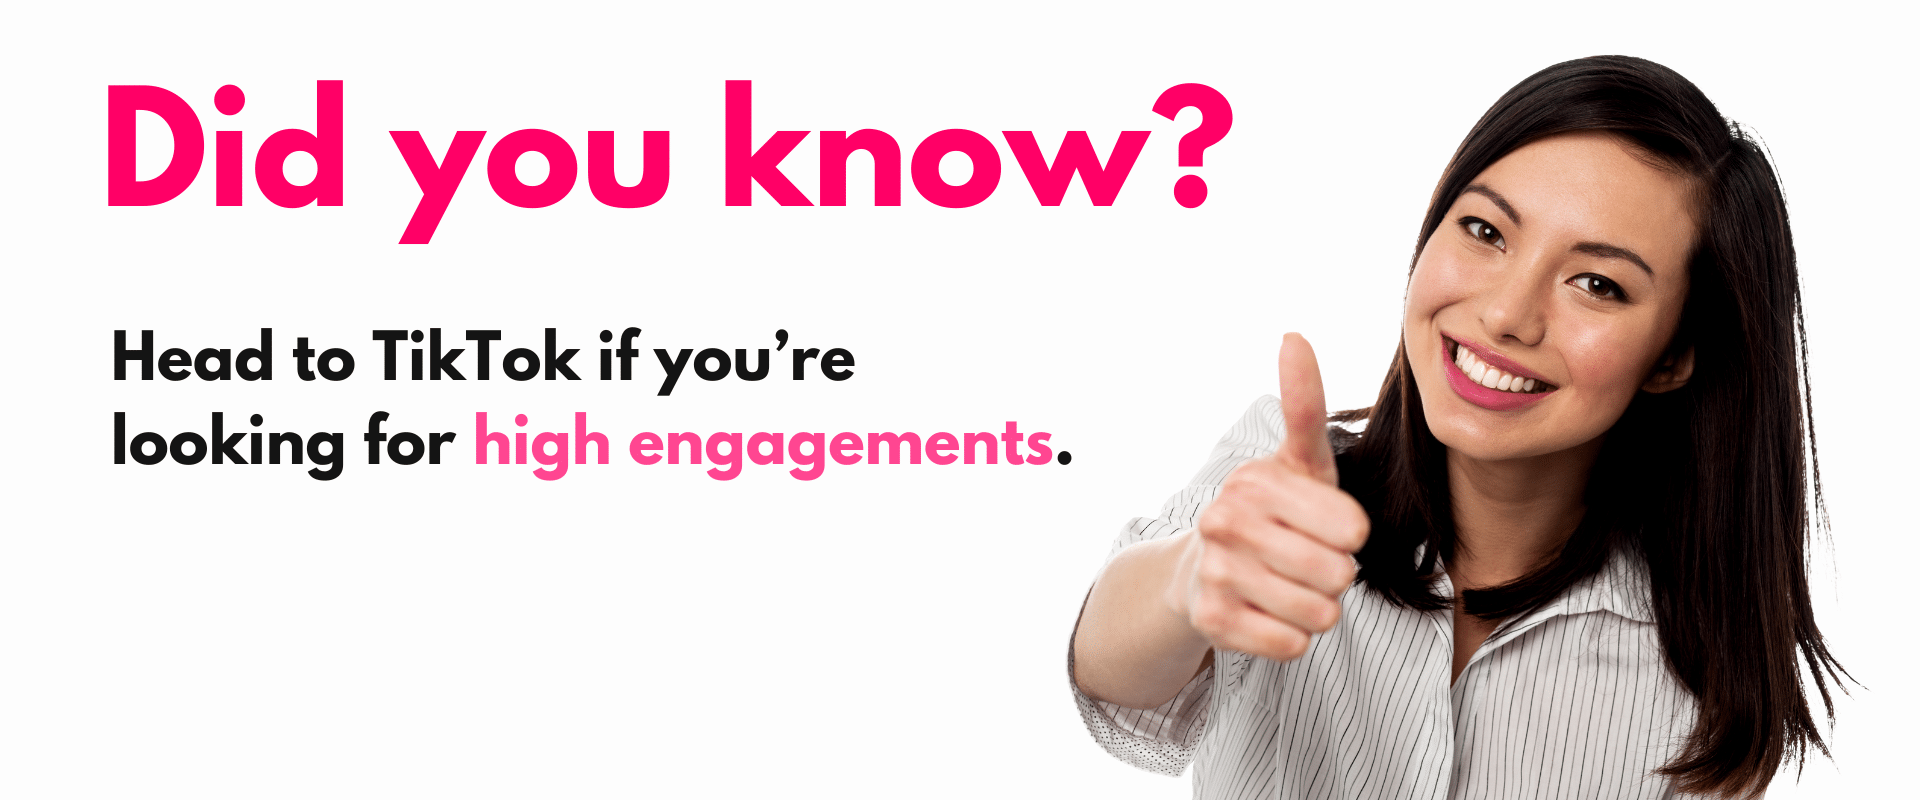 Did you know? head to tik if you're looking for engagements.